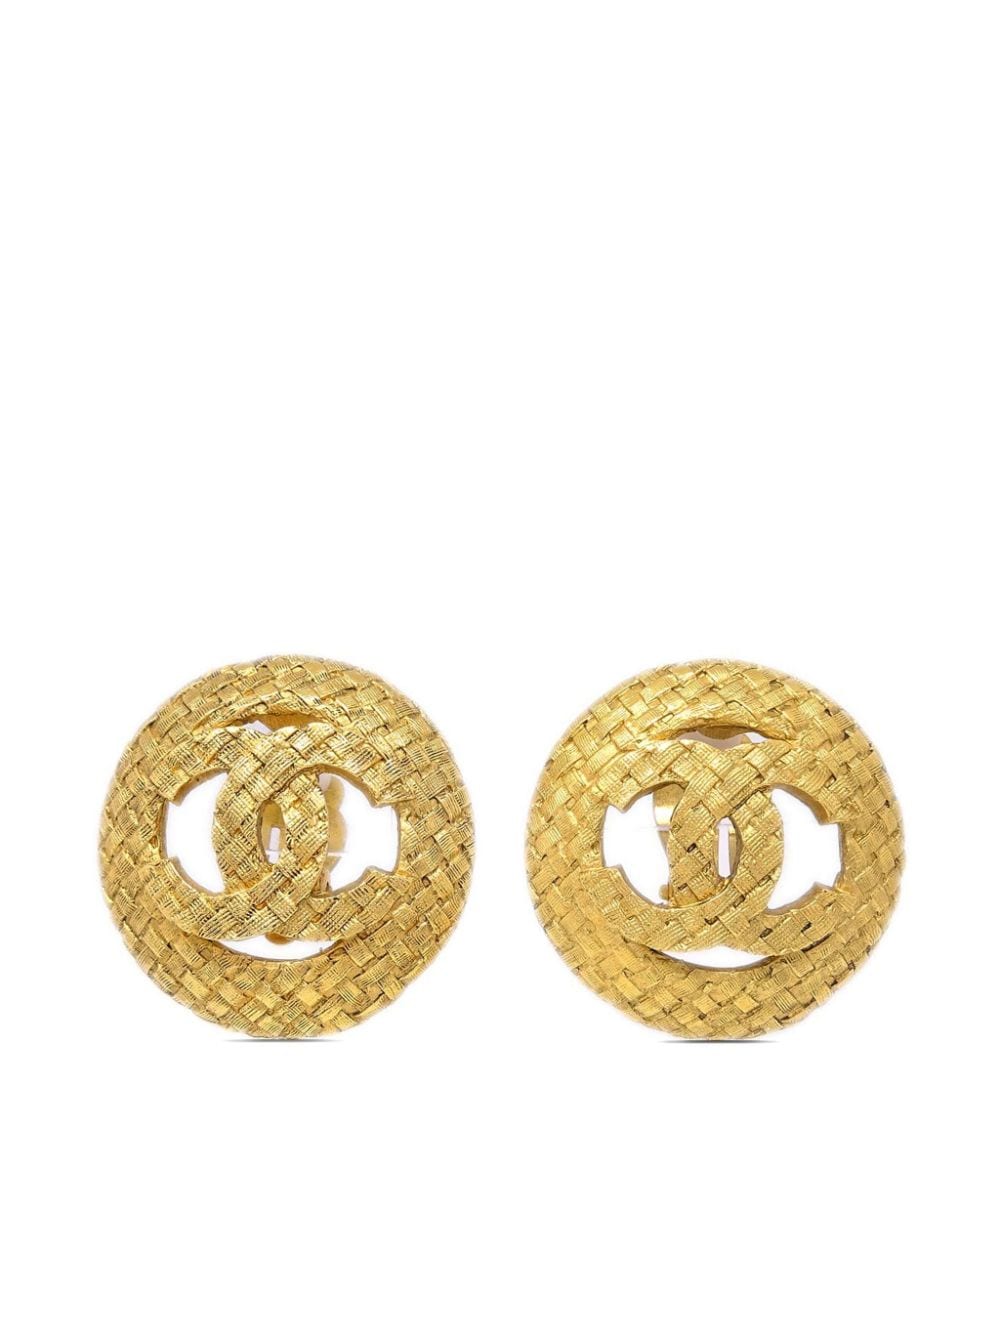 Pre-owned Chanel 1994 Tweed-effect Cc-logo Clip-on Earrings In Gold